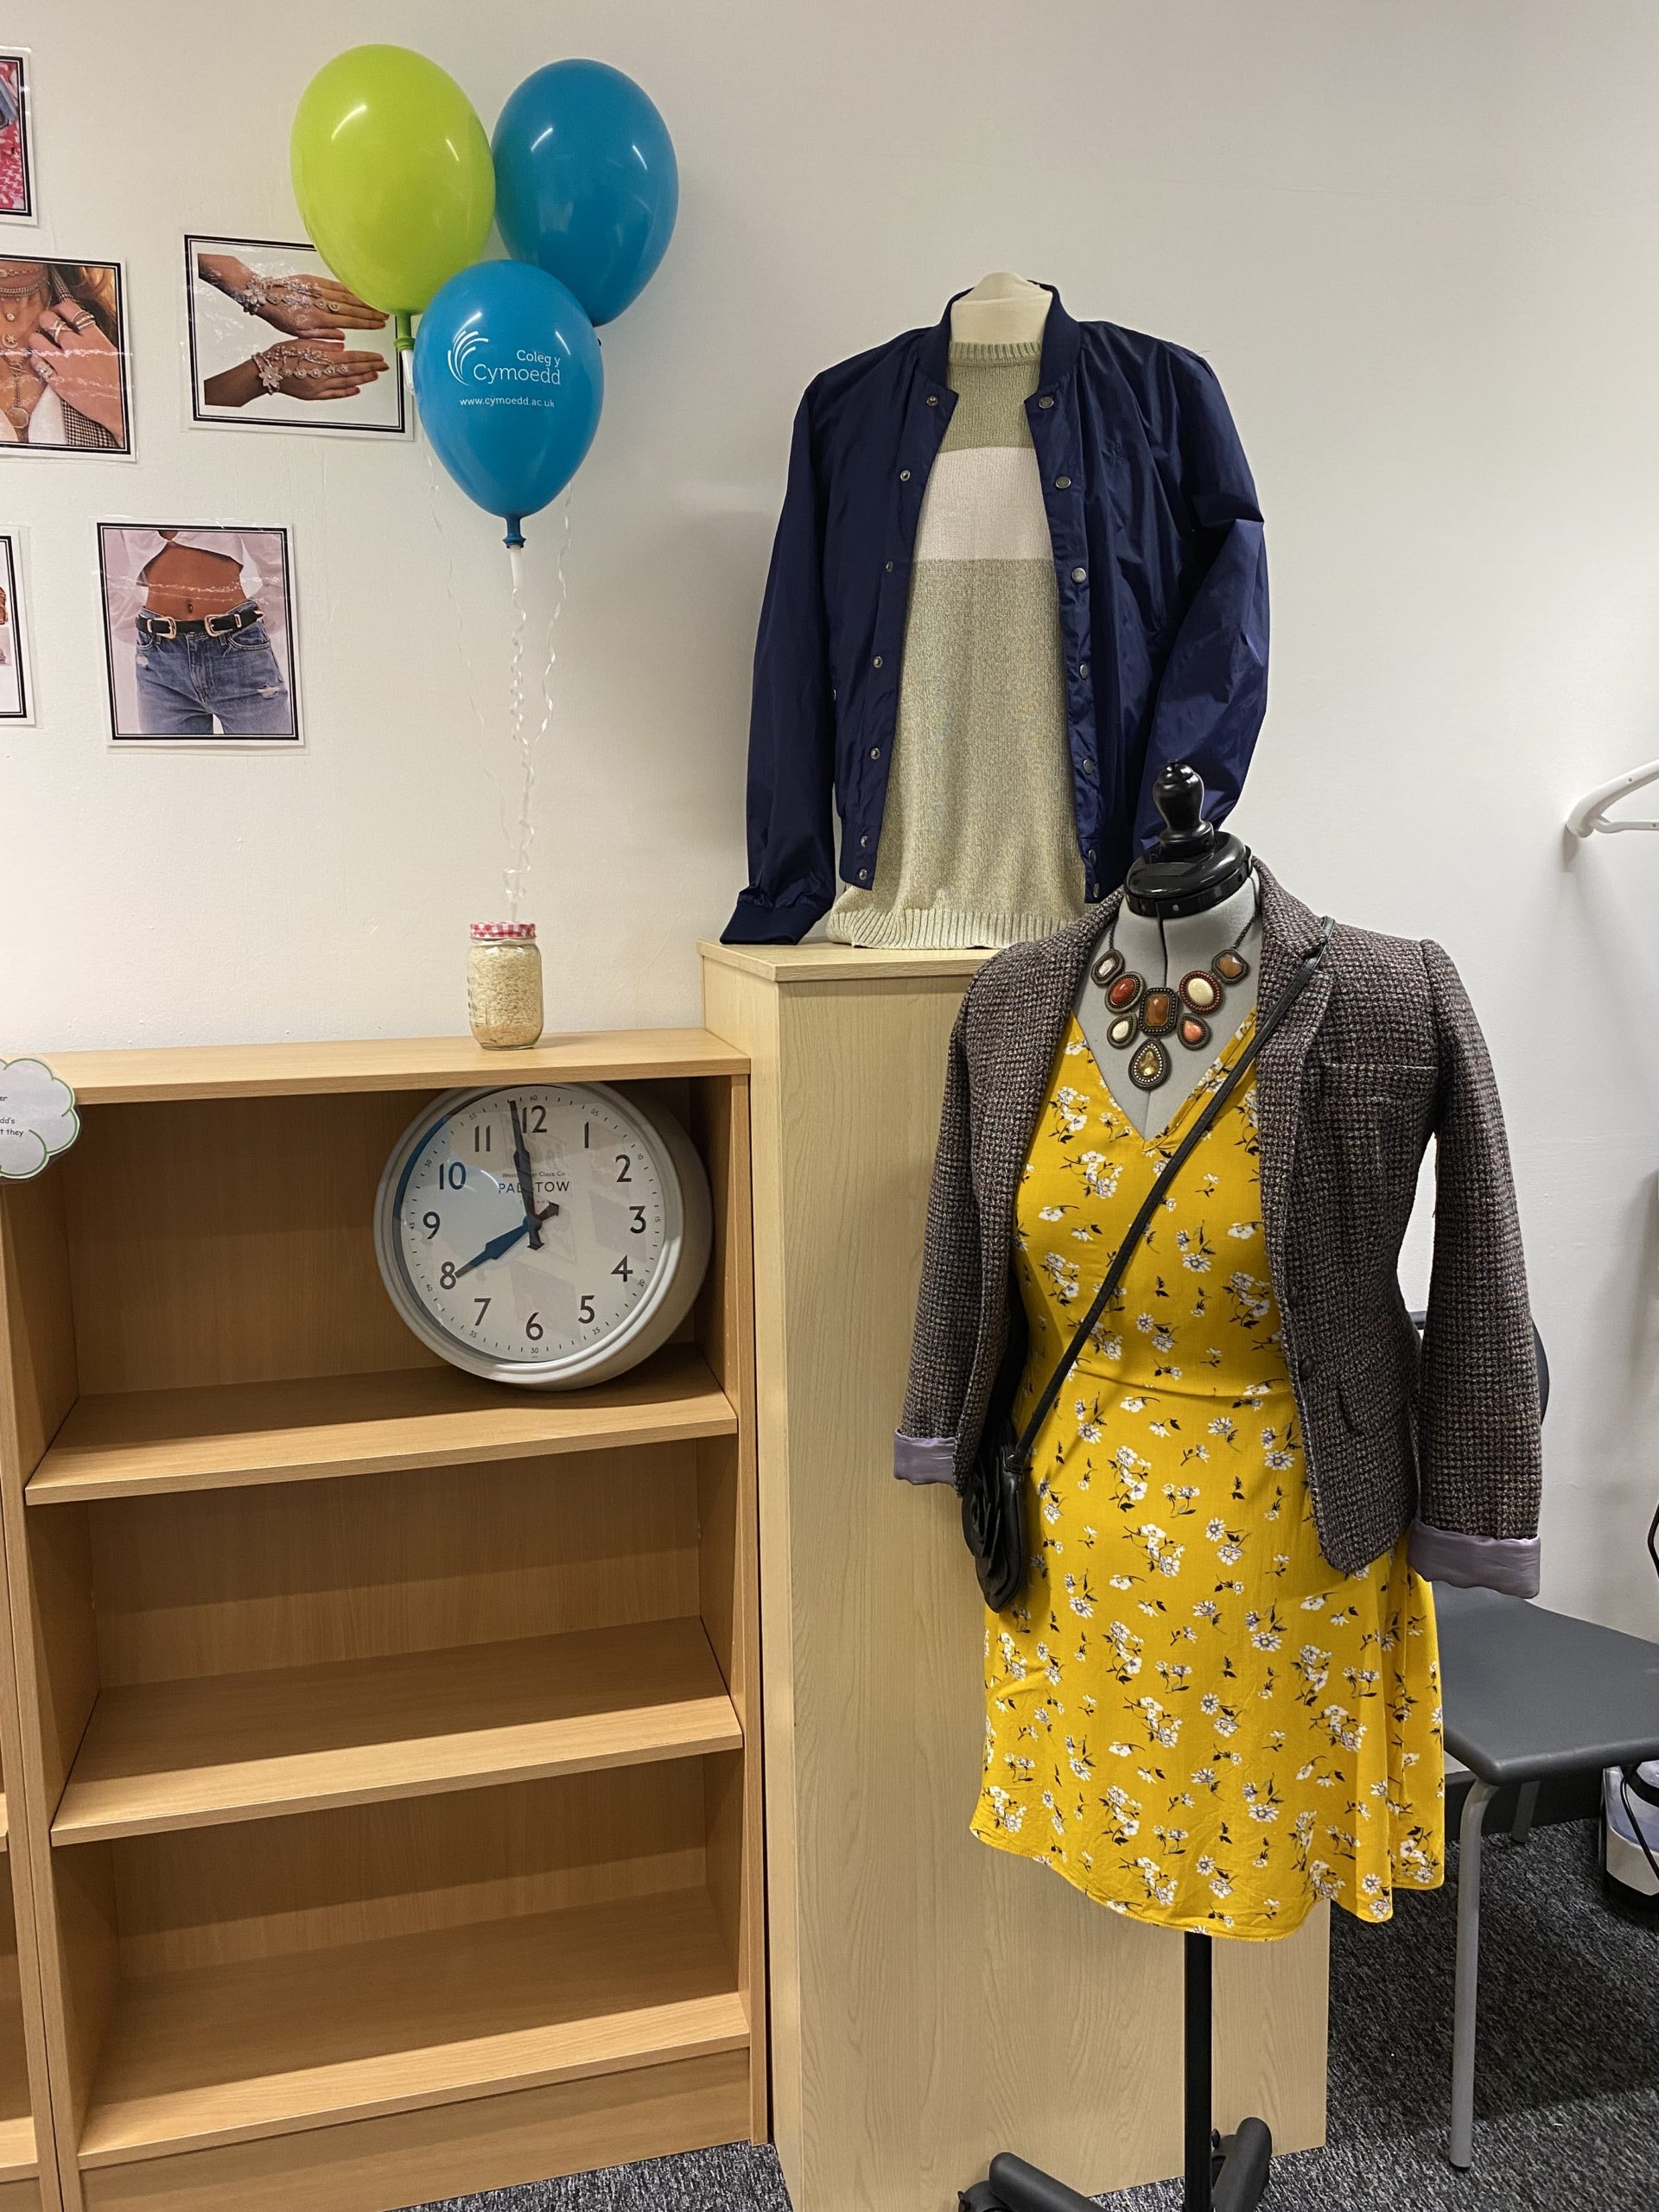 Walk-In Wardrobe: Coleg y Cymoedd’s innovative solution to support learners in need of smart outfits